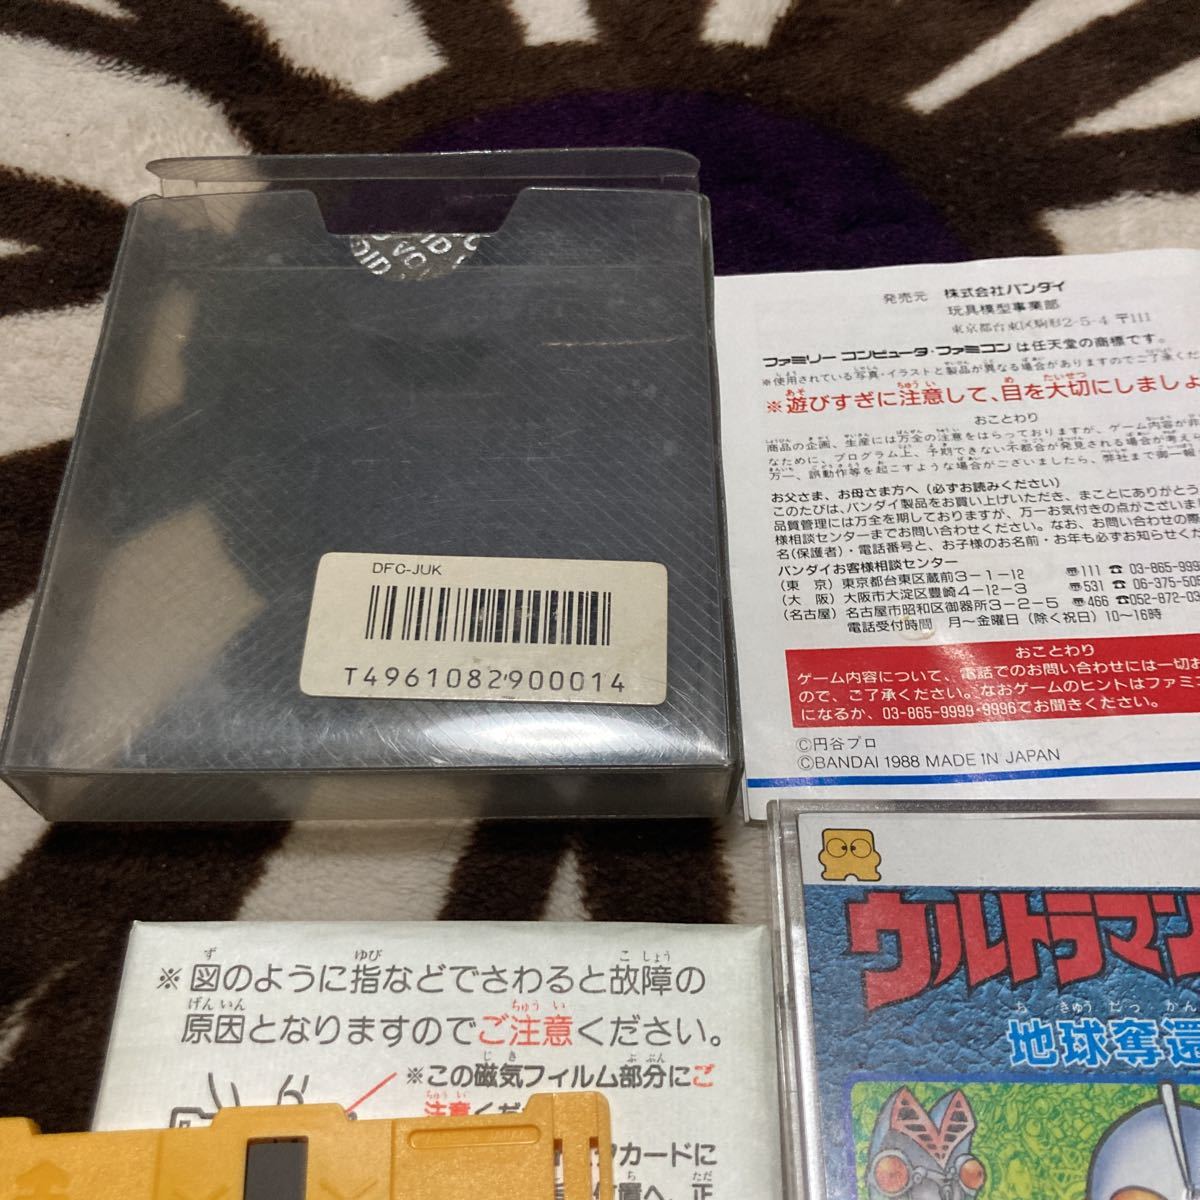  free shipping disk system Ultraman club the earth .. military operation case instructions attaching Famicom disk system FC